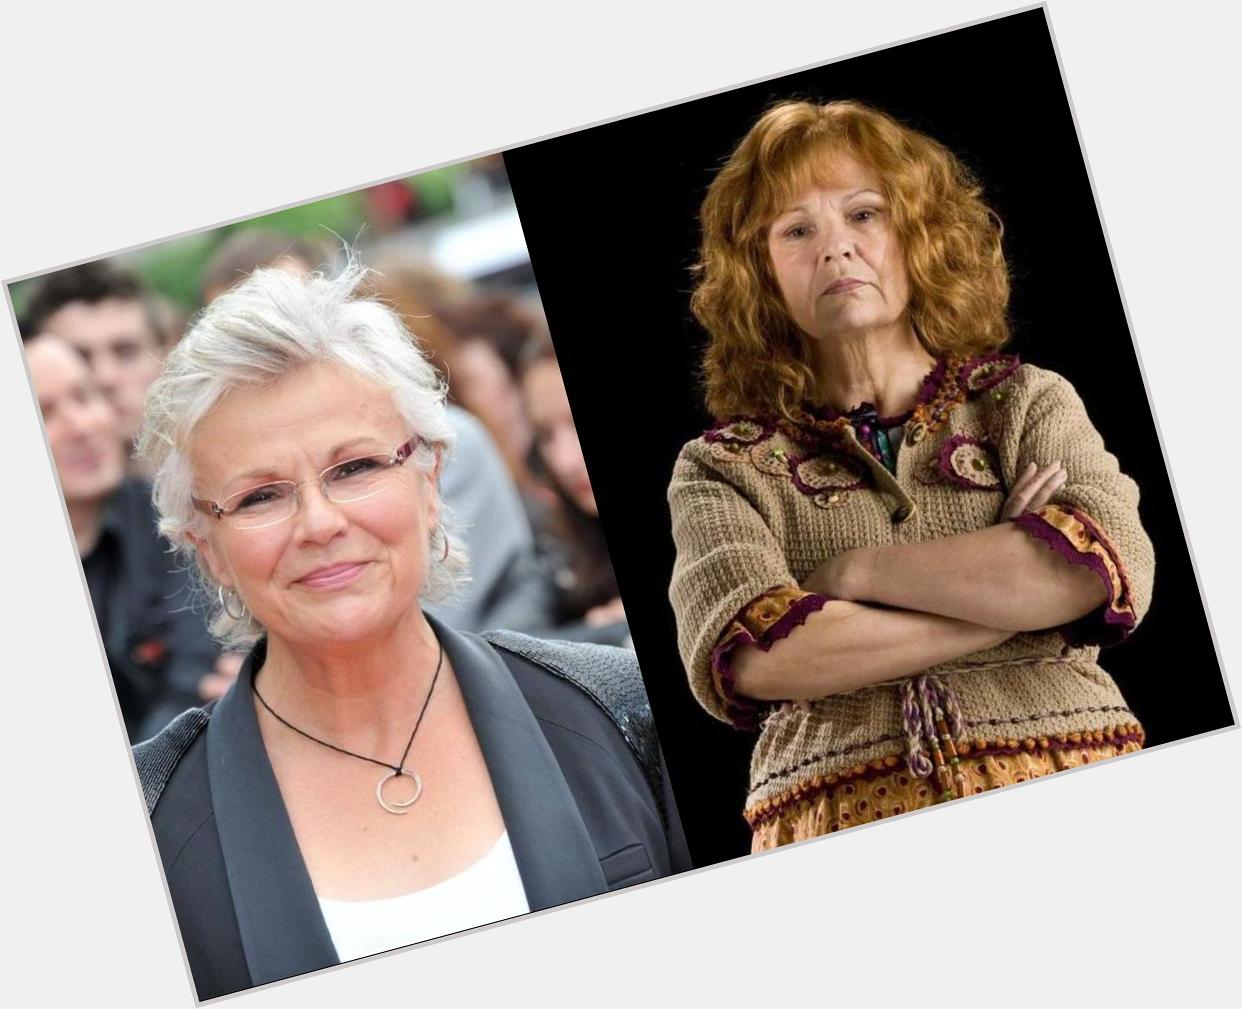 Happy 65th Birthday to Julie Walters! She played Molly Weasley in the Harry Potter films. 